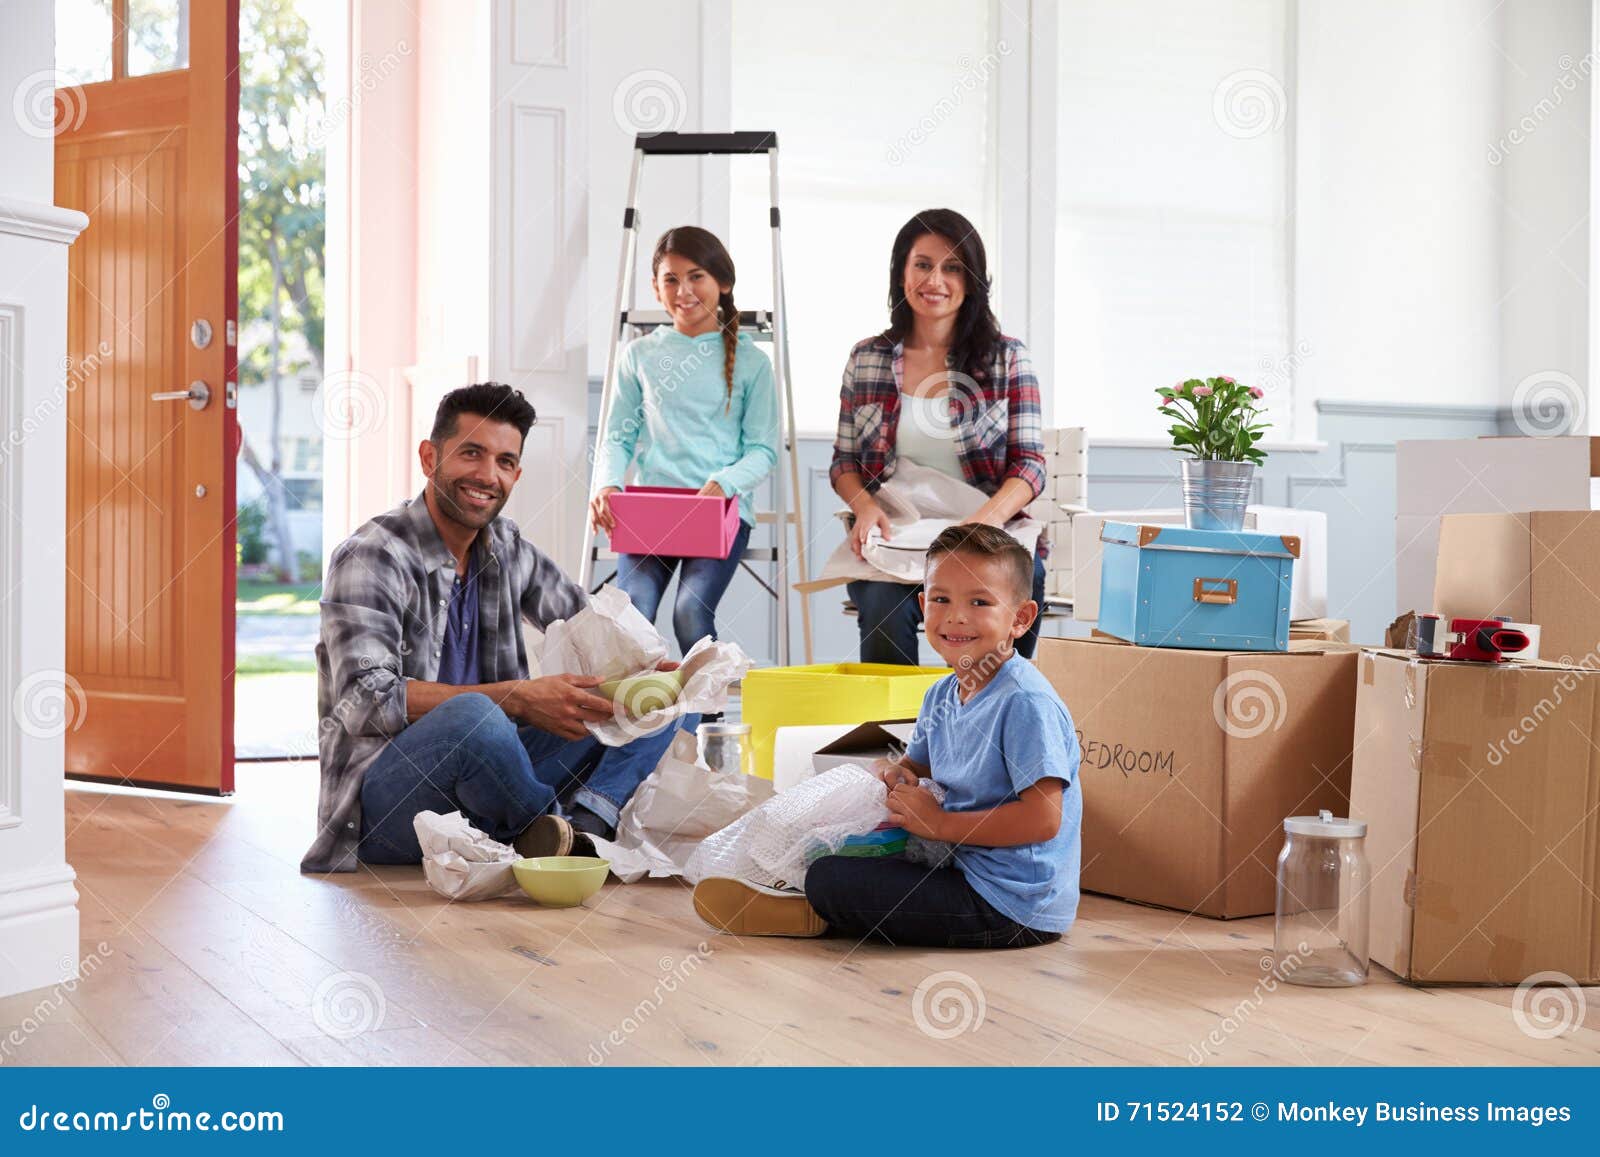 portrait of hispanic family moving into new home